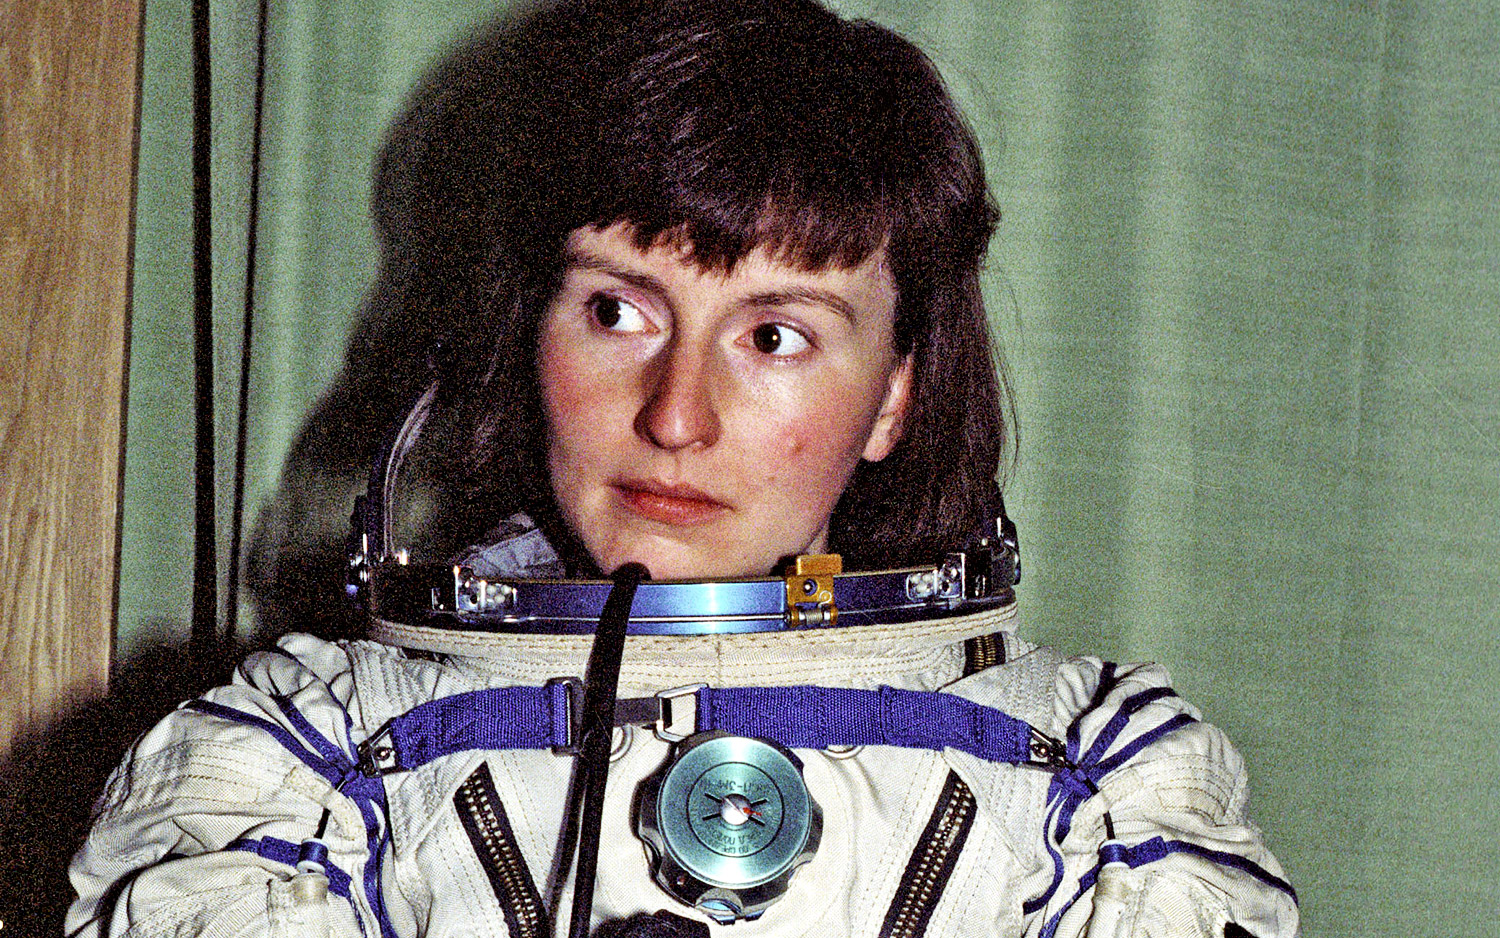 British chemist Helen Sharman became the first British person to fly in space when she visited the Mir space station aboard the Soyuz TM-12 in 1991.